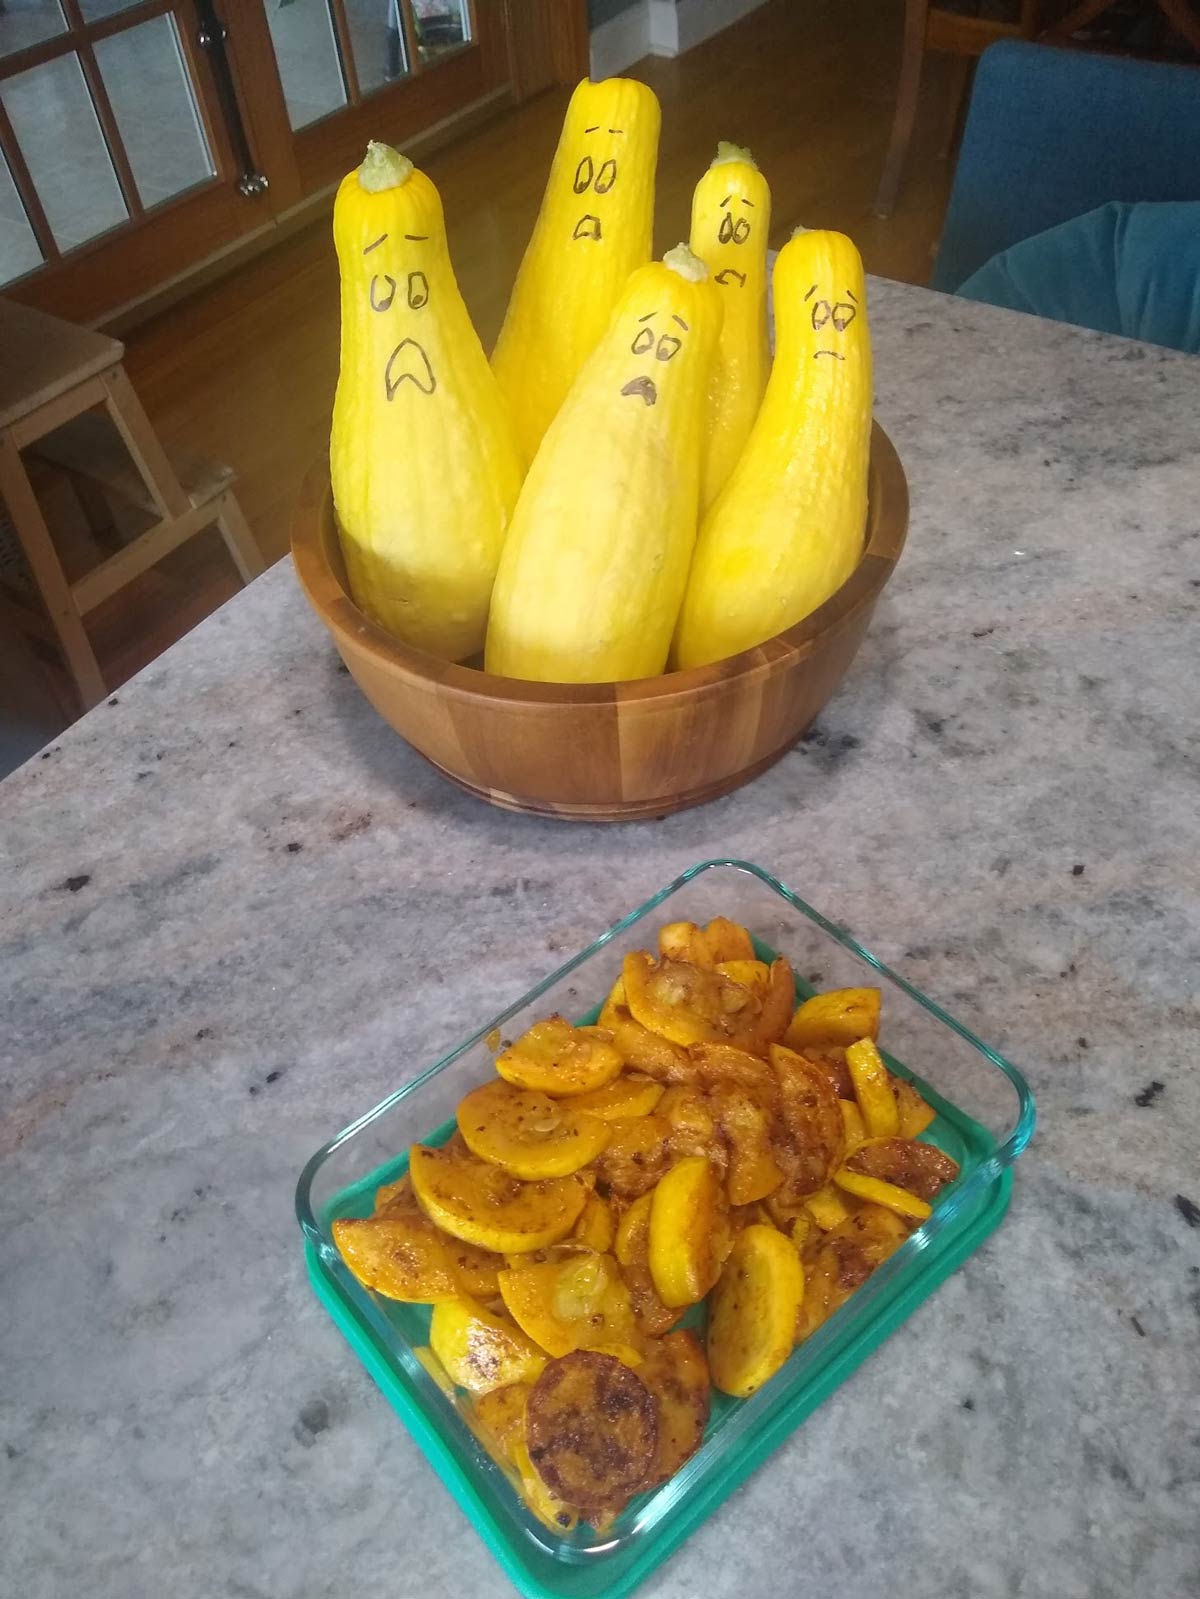 Every time I cook a squash from our garden, I make the rest watch